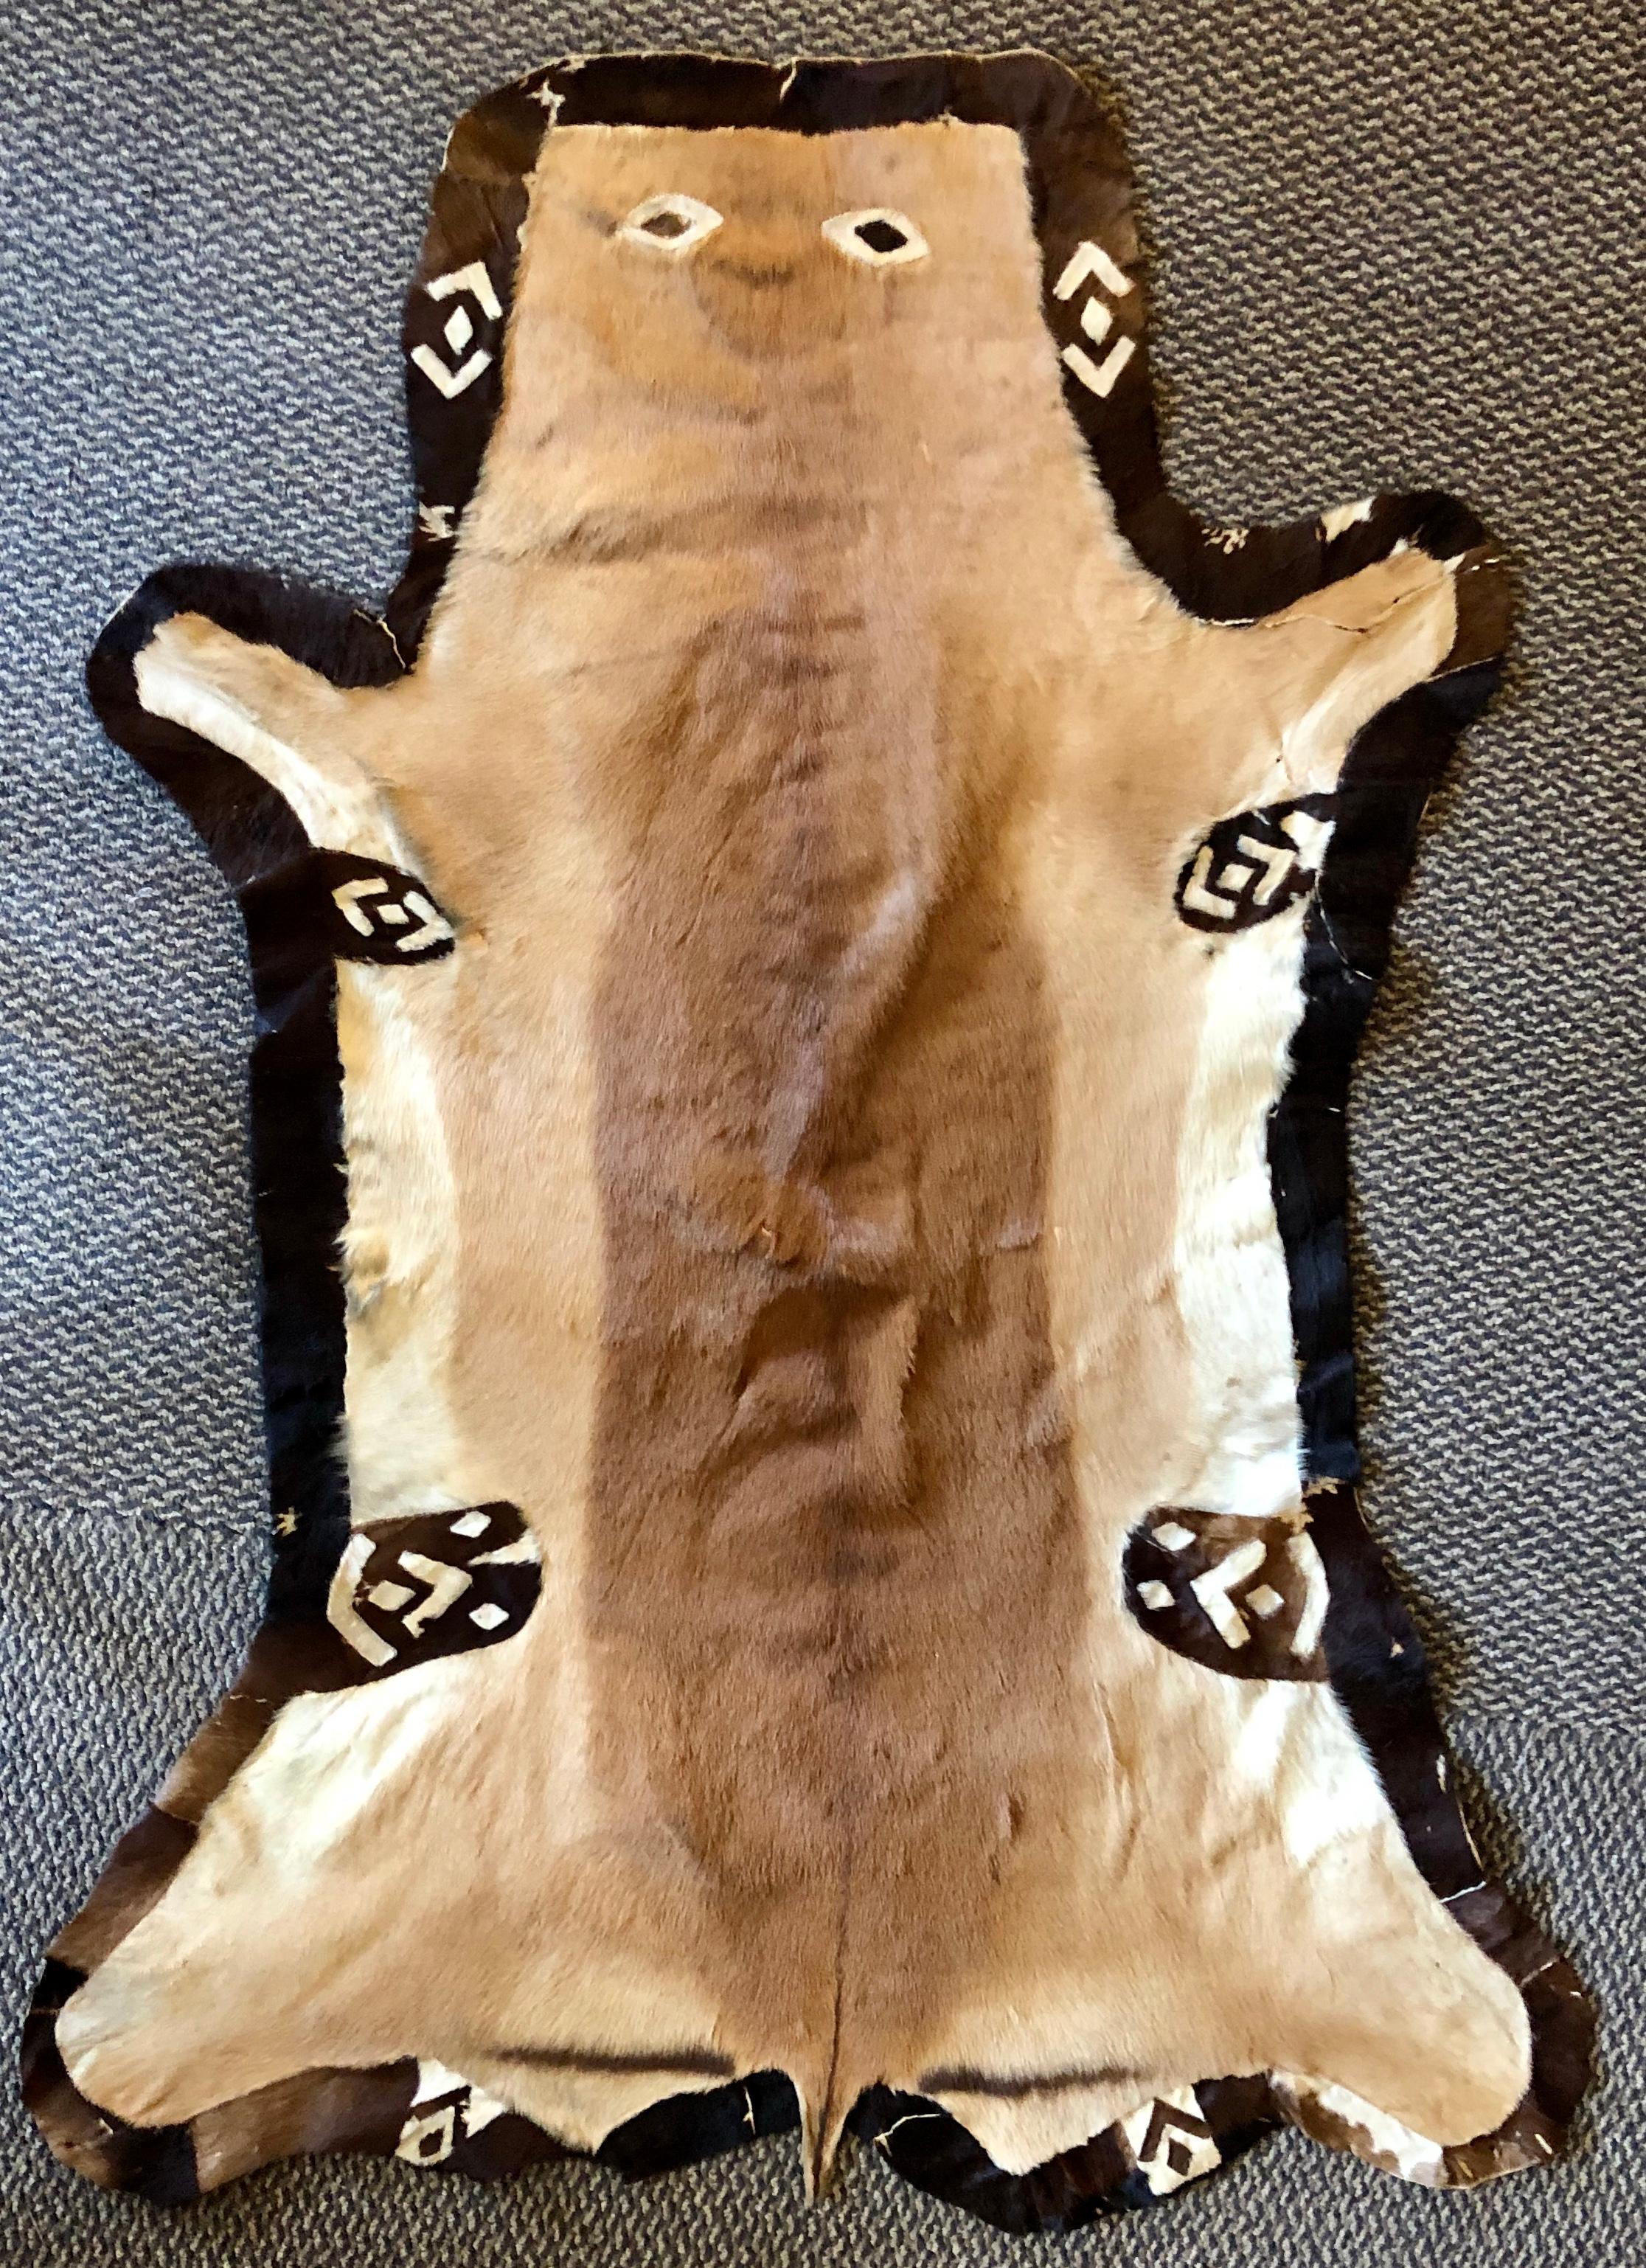 Adirondack Stitch Animal Skin Rug or Carpet with a Happy Face